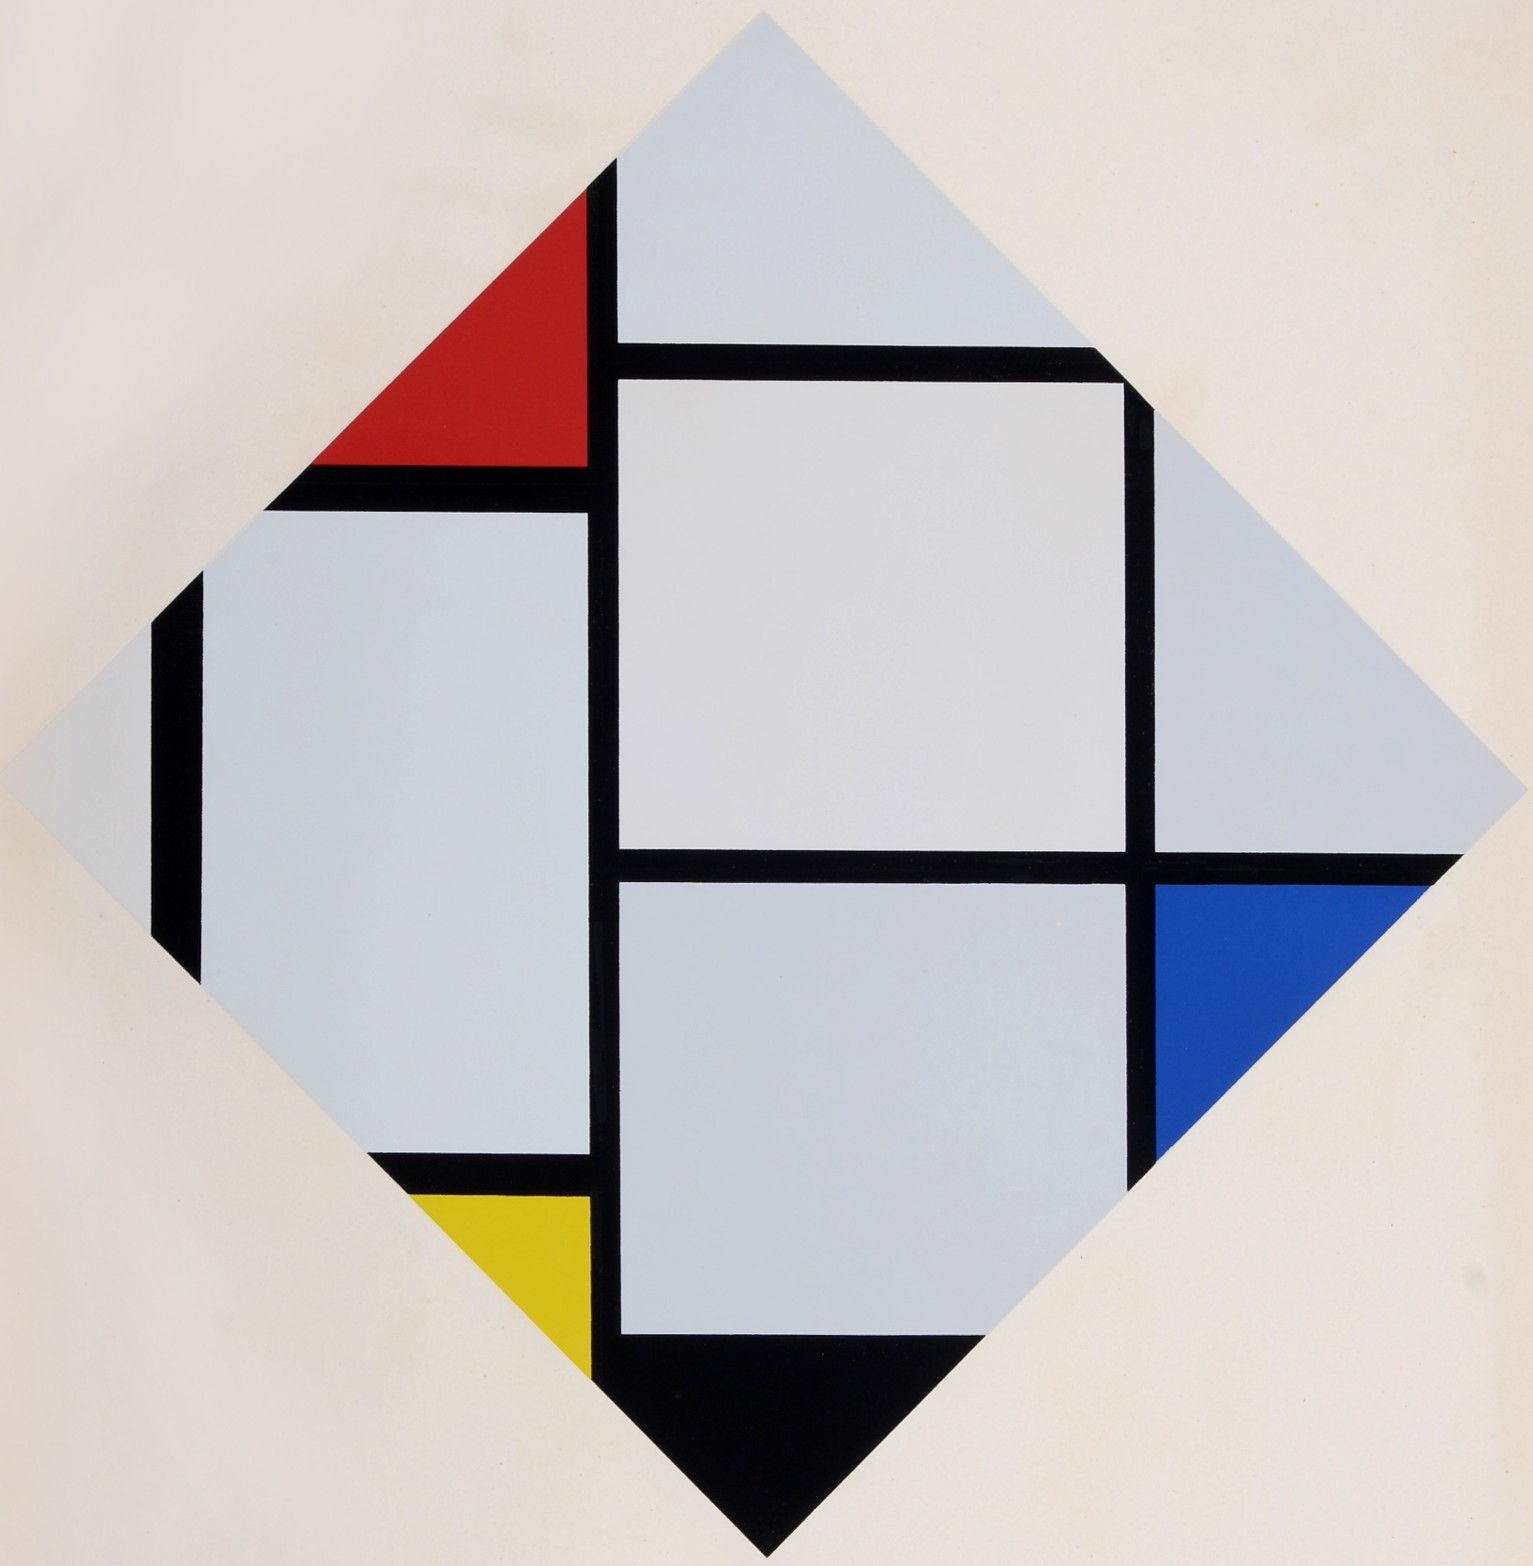 Piet MONDRIAN Piet Mondrian (after) (1872-1944)

Composition in the Tile with Re&hellip;